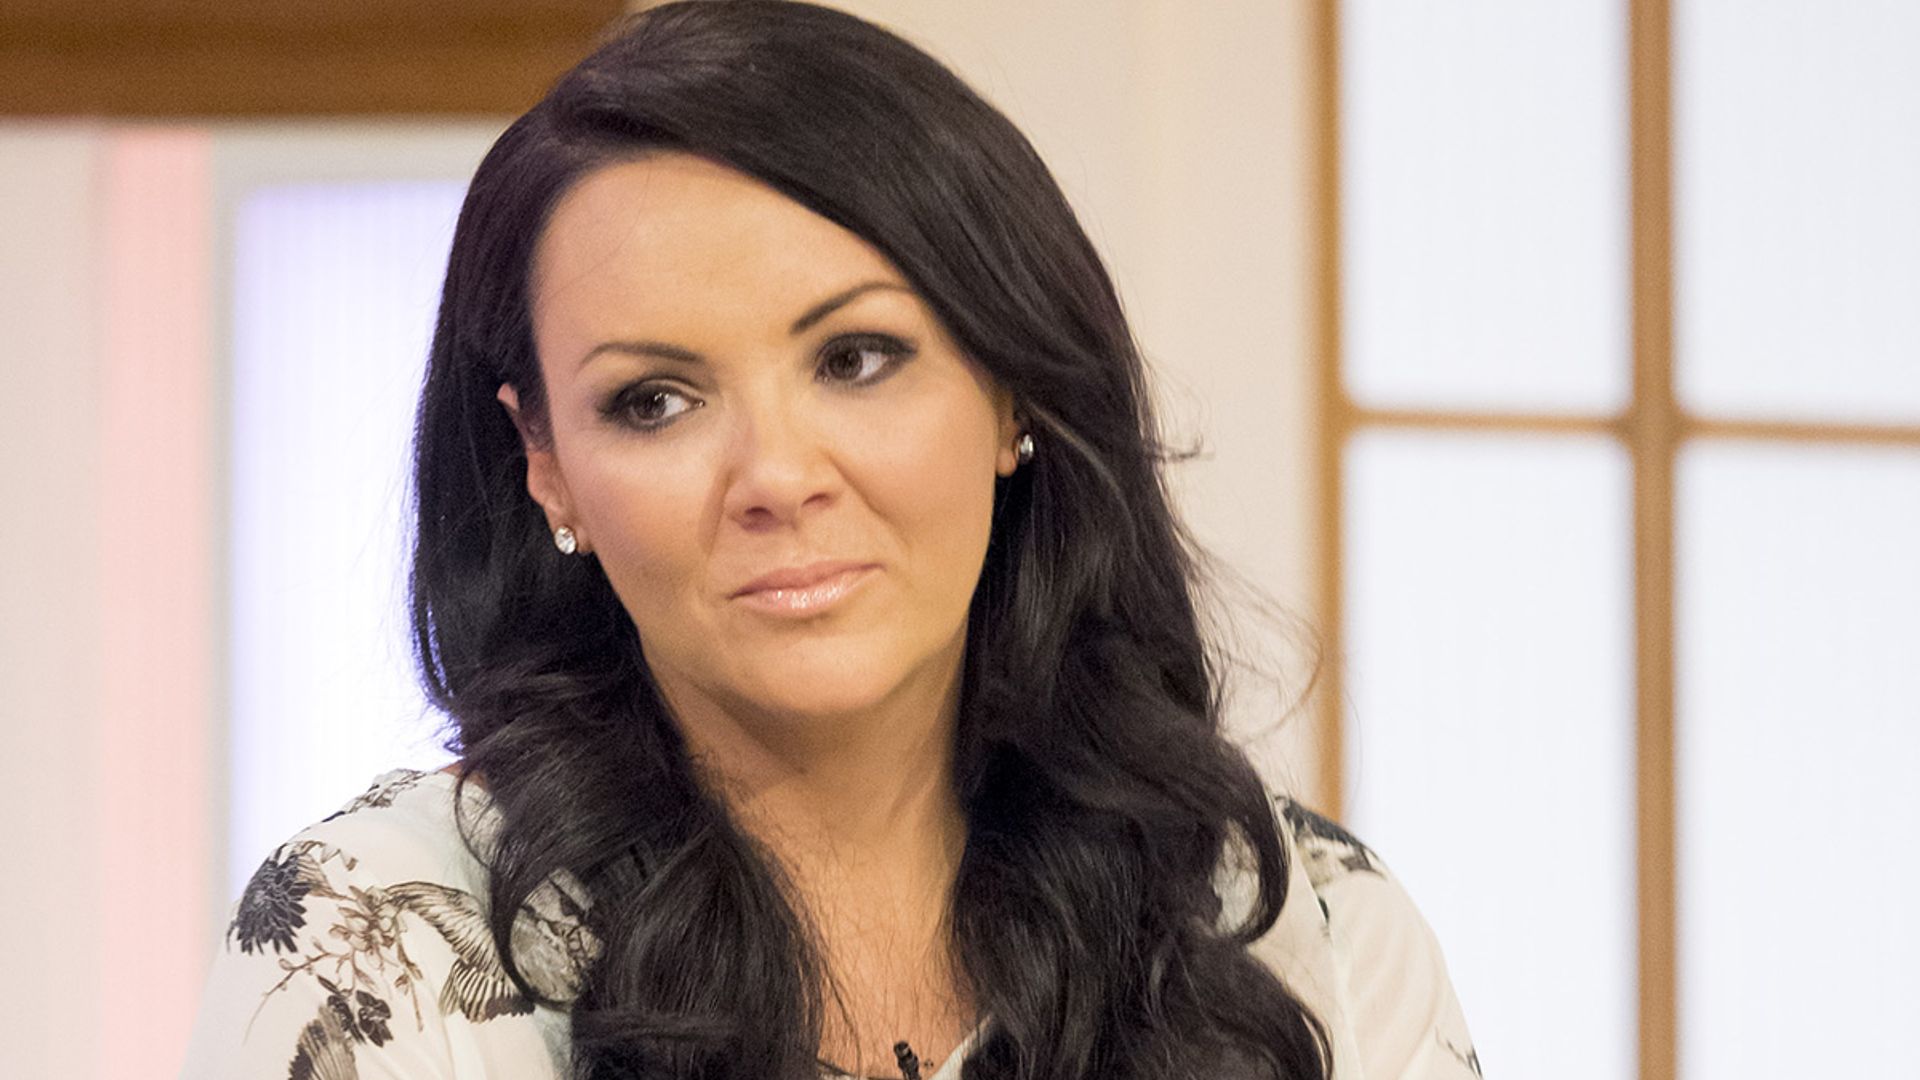 Martine McCutcheon inundated with support as she opens up about mental health